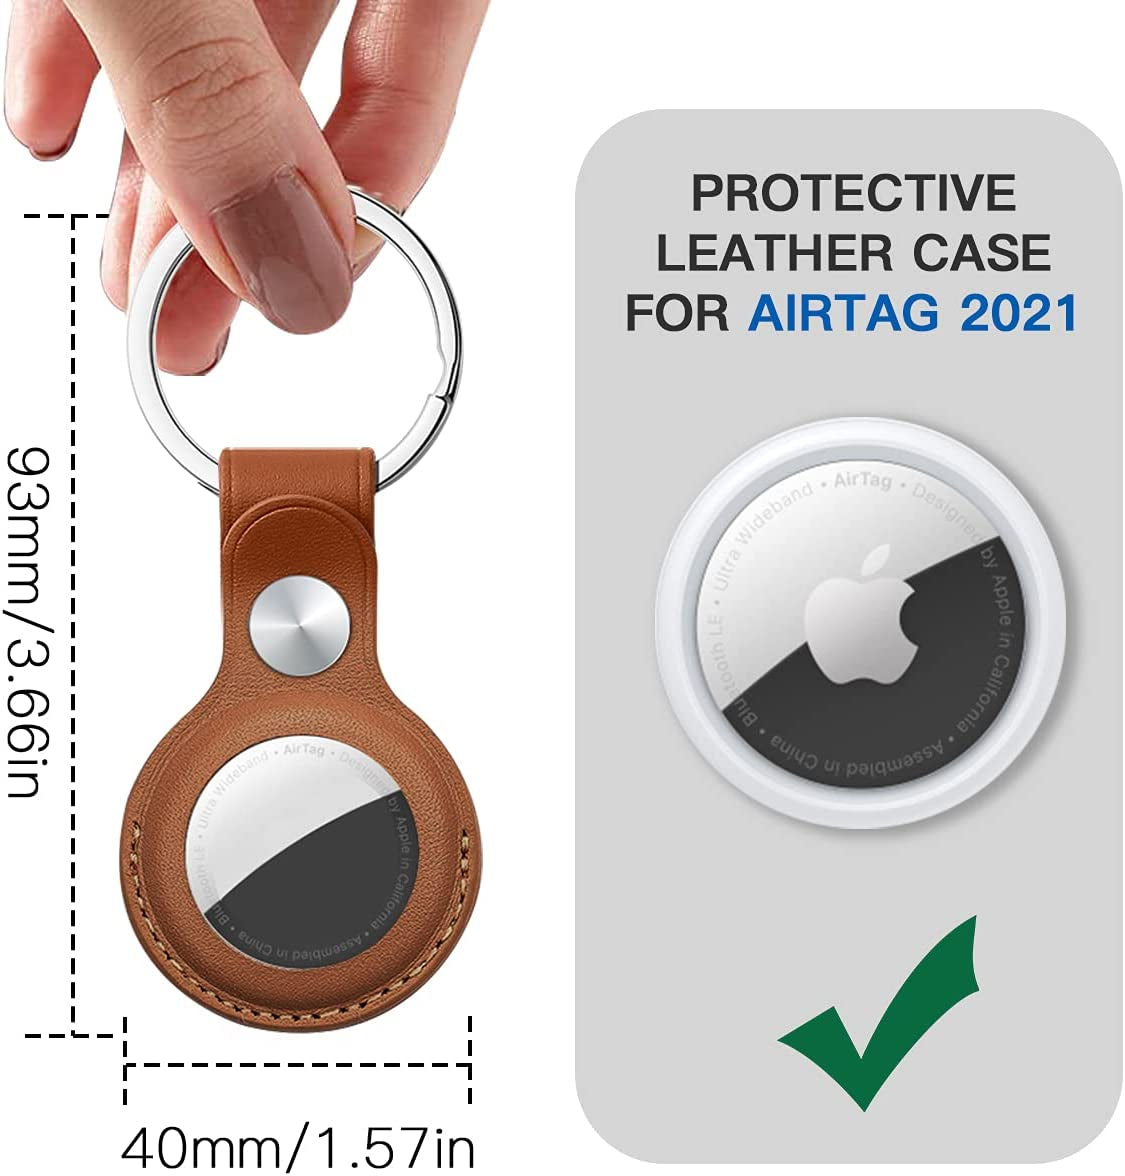 Aicase Case for Airtag with Keychain Ring, Protective Leather Holder Tracker Cover with Keyring Compatible with Apple New Air Tag 2021 for Pets, Keys, Luggage, Backpacks Electronics > GPS Accessories > GPS Cases AICase   